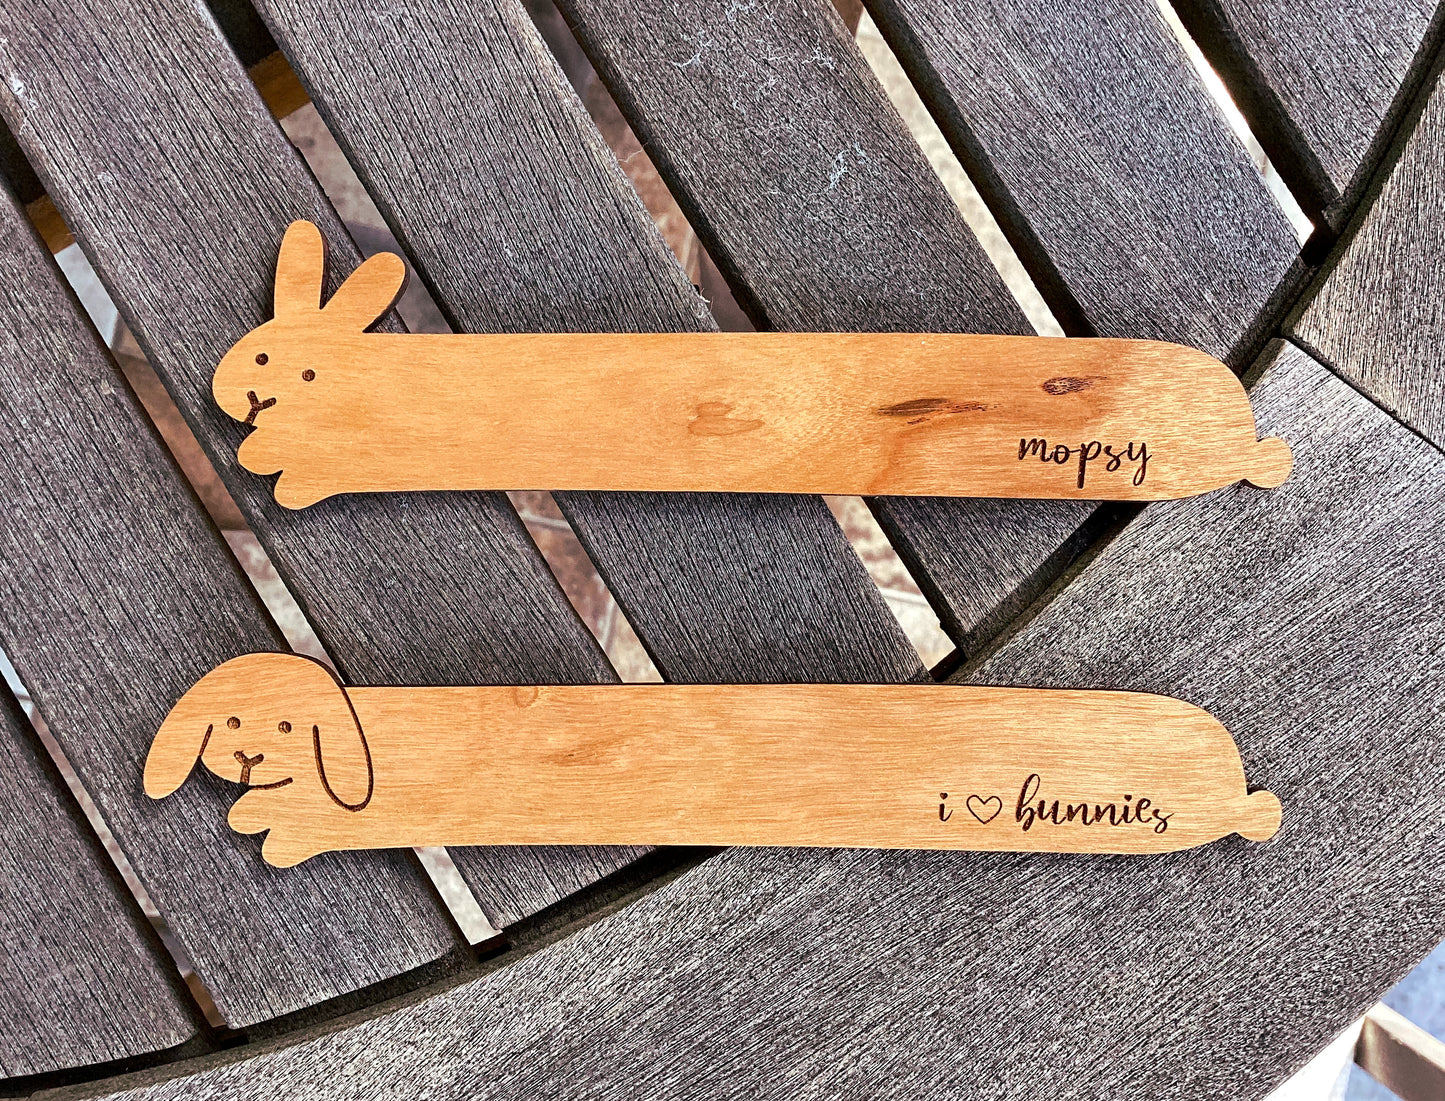 wooden long bunny bookmarks (uppy ear and lop)